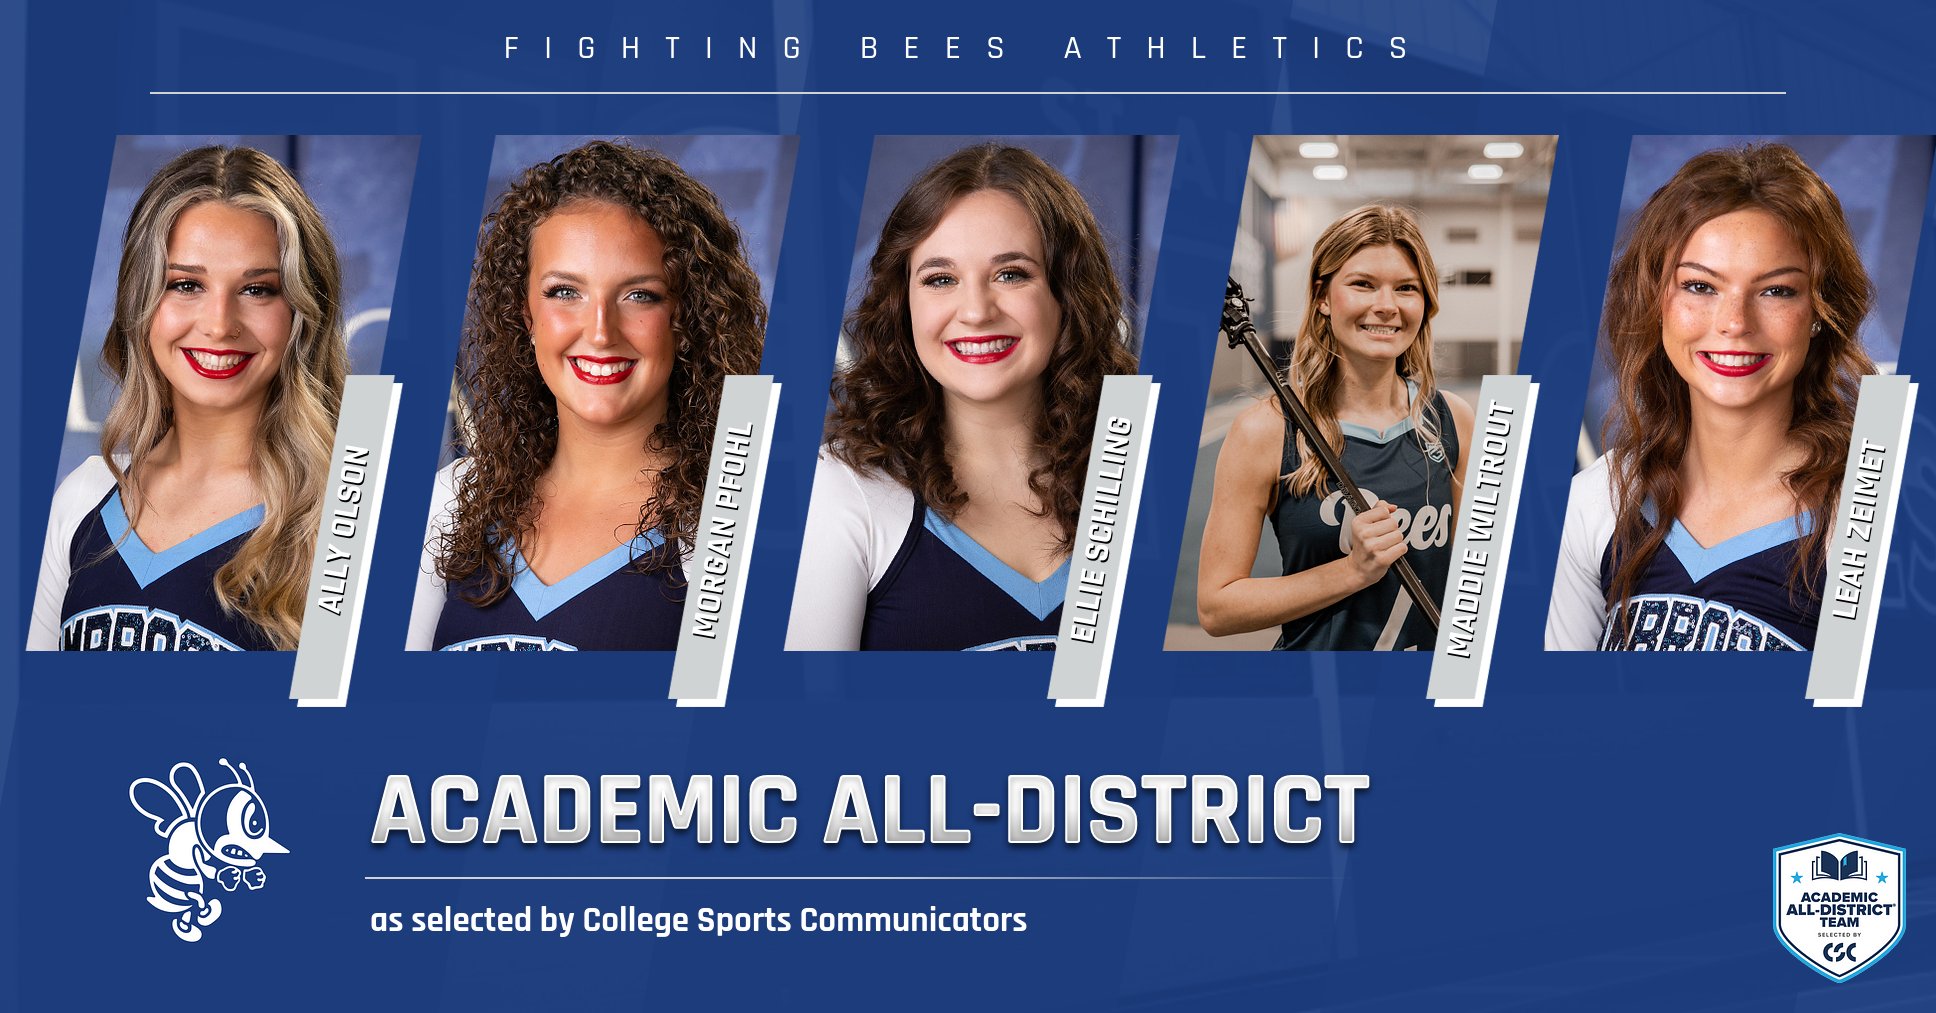 Five Fighting Bees named to Academic All-District Women's At-Large Team